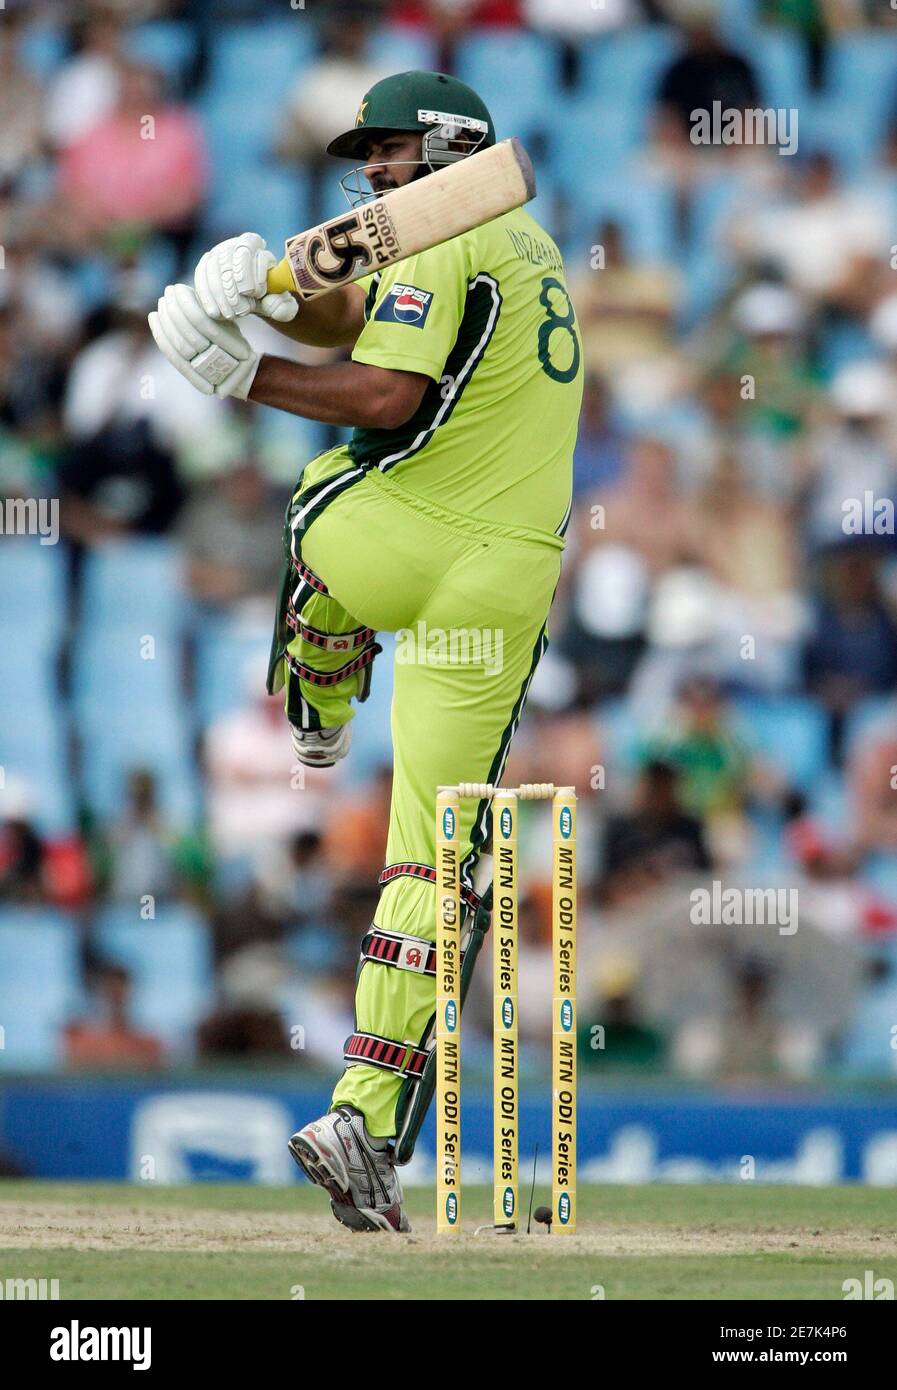 Pakistan's cricket player Inzamam-ul-Haq plays a shot during the first one  day international cricket match against South Africa in Pretoria, February  4, 2007. REUTERS/Siphiwe Sibeko (SOUTH AFRICA Stock Photo - Alamy